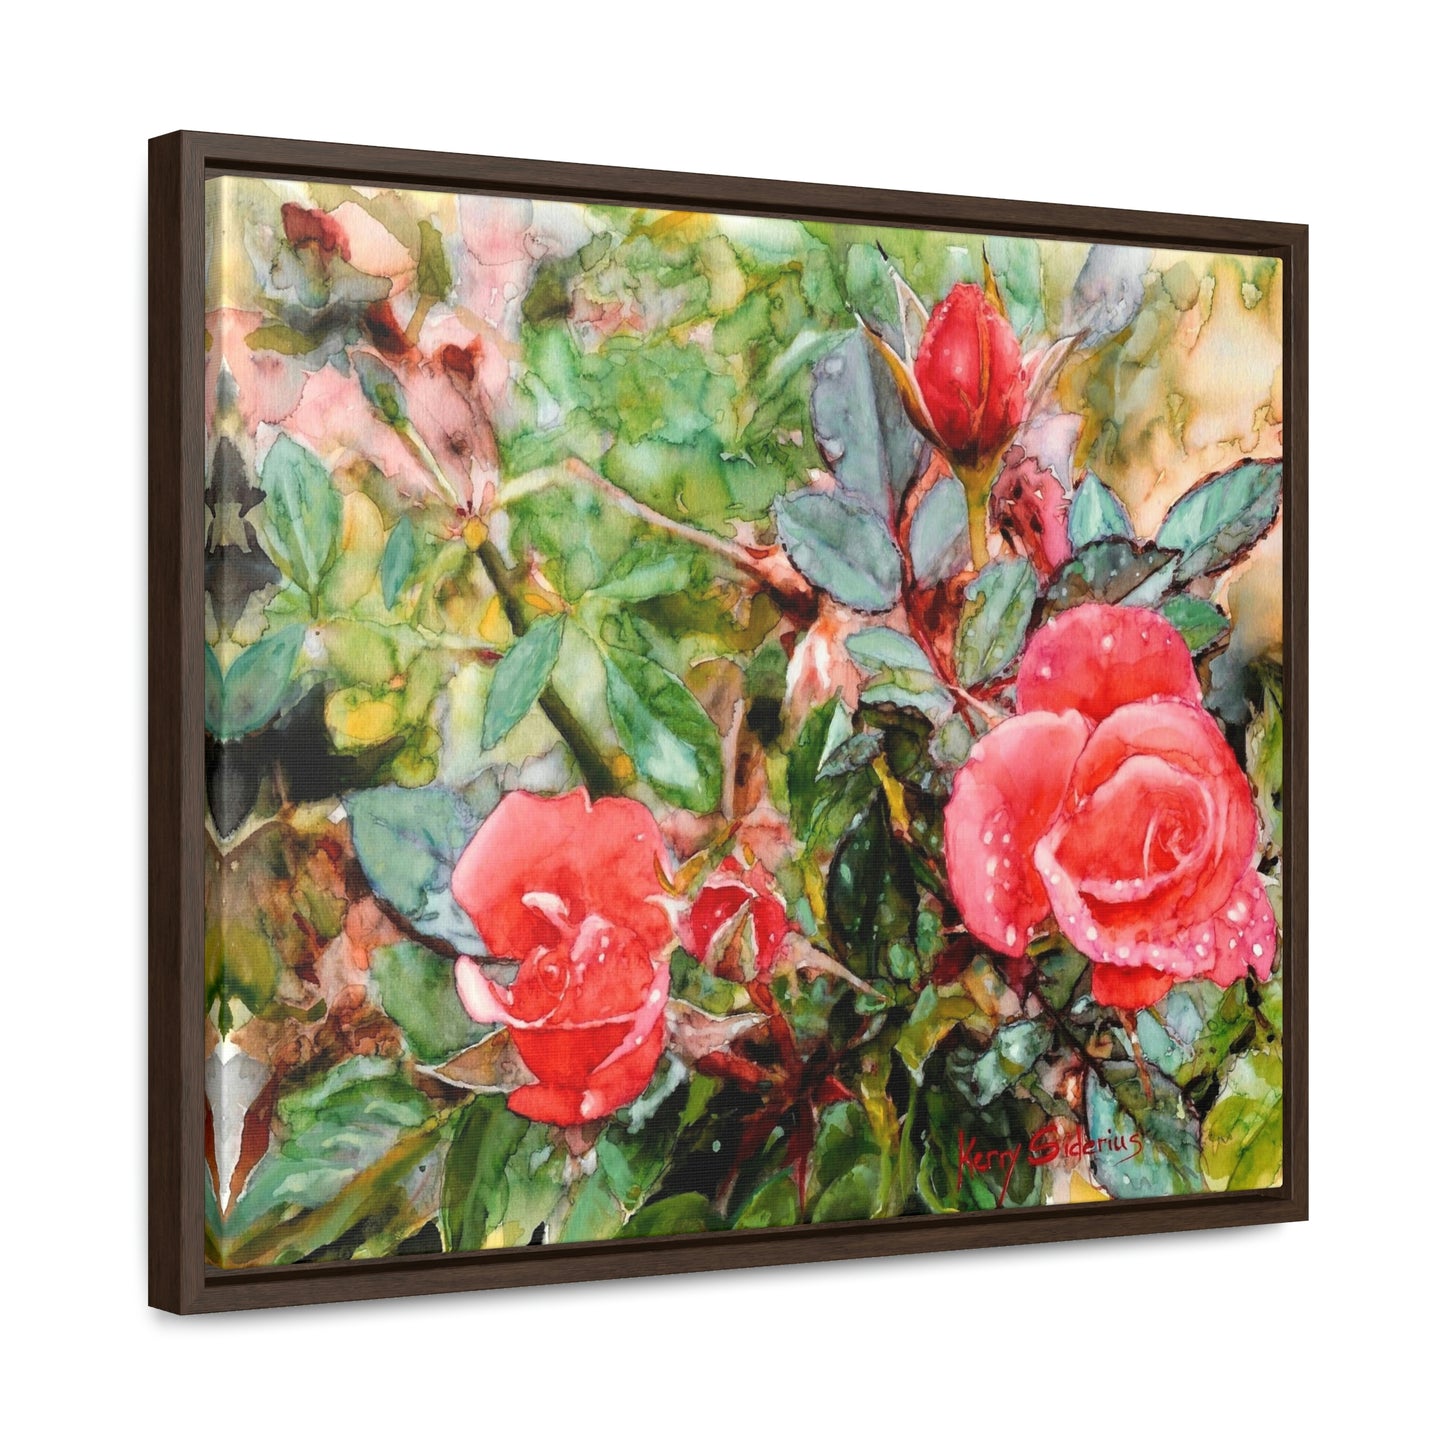 "Raindrops on Roses" Gallery Wrapped Wood Framed Canvas - Kerry Siderius Art 